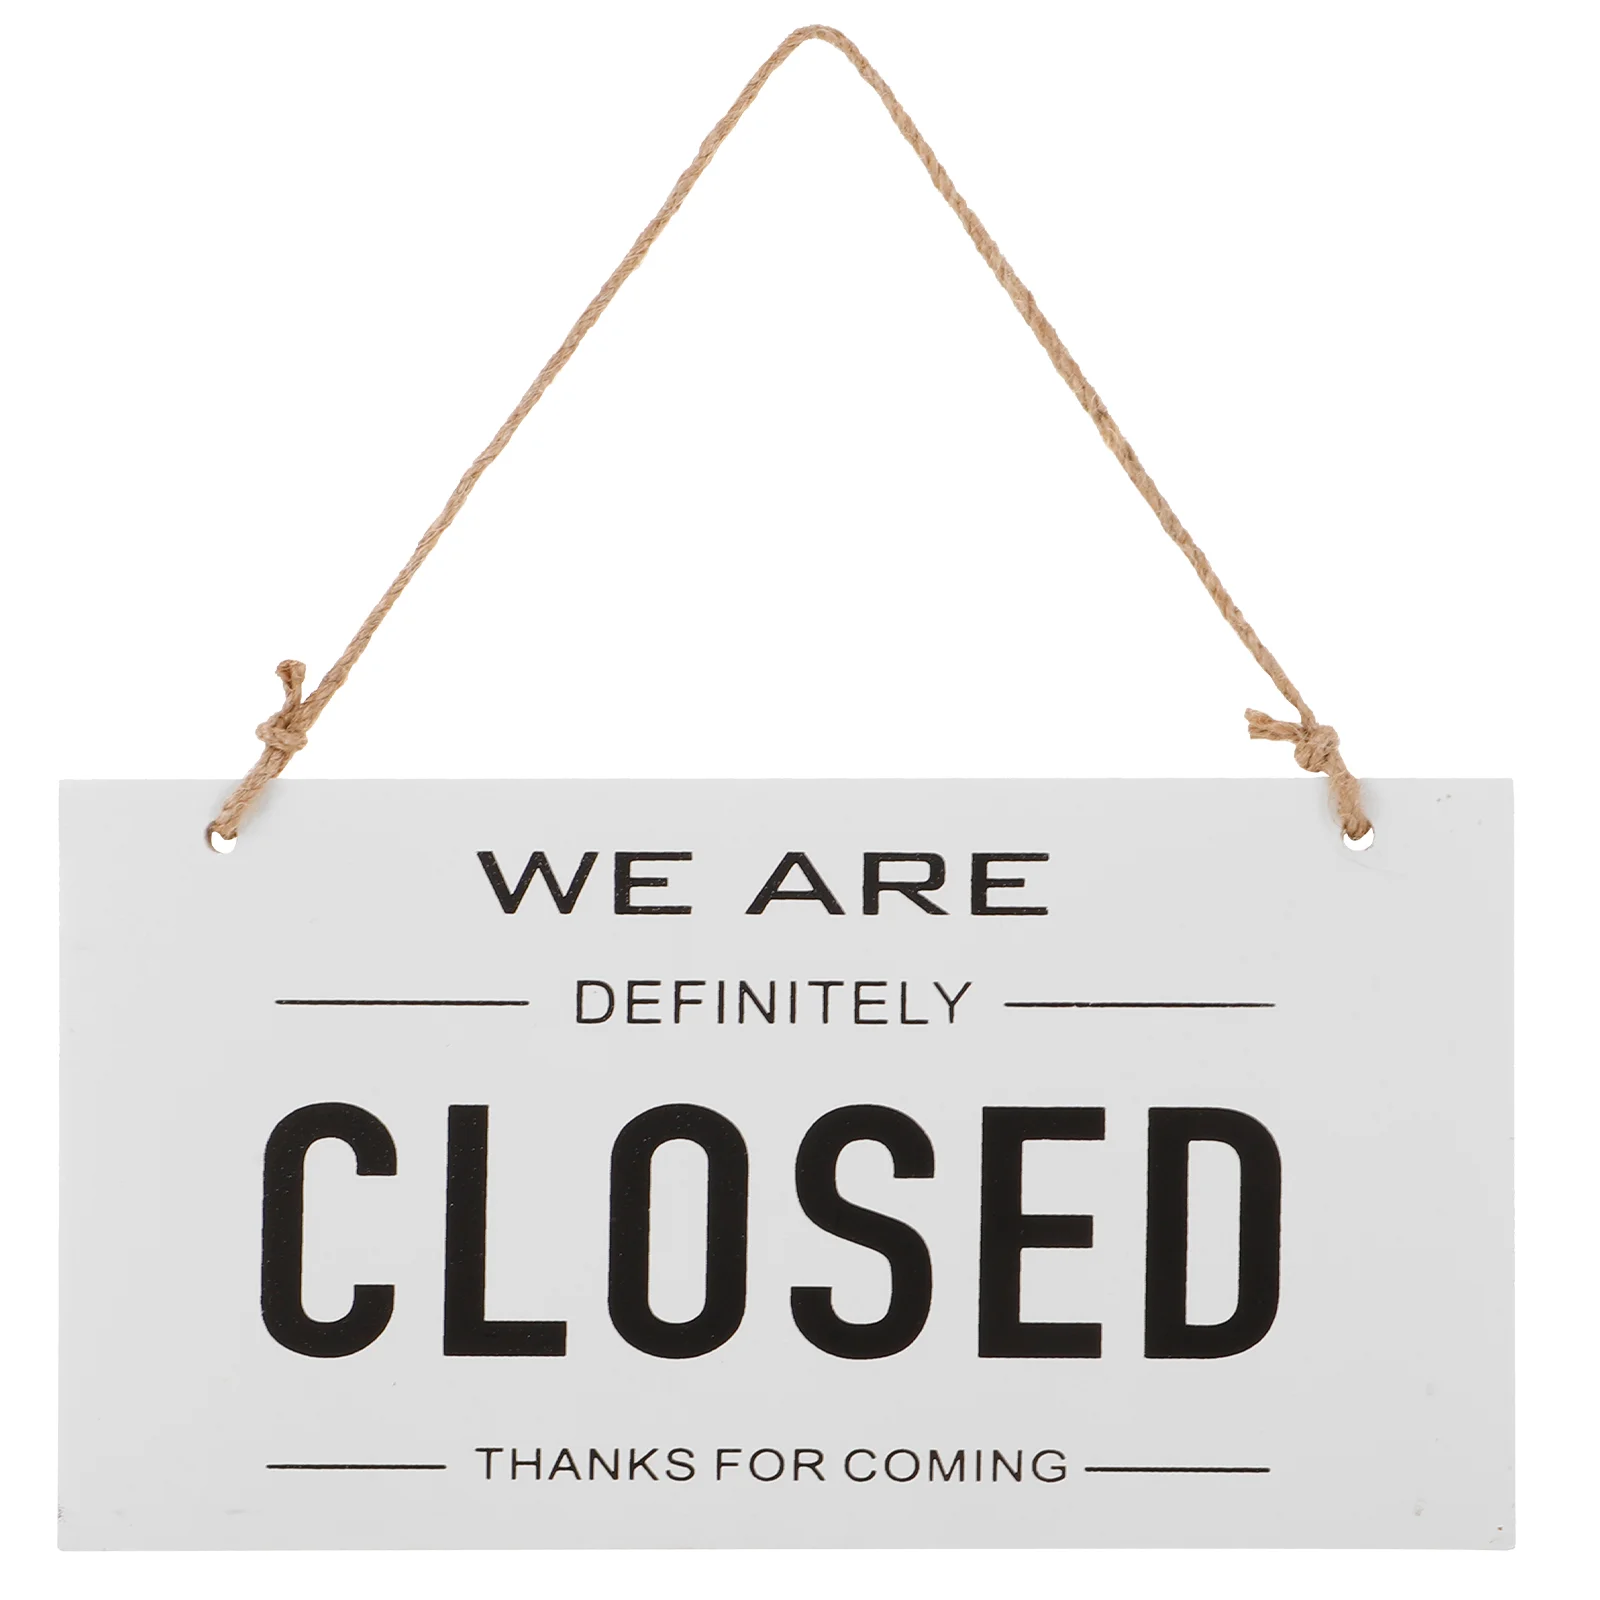 Business Notice Board Household Decor Open Closed Sign for Front Door Double Sided Office Wood Decorations Outdoor Signs business notice board decor open closed sign for front door porch the wood outdoor and signs